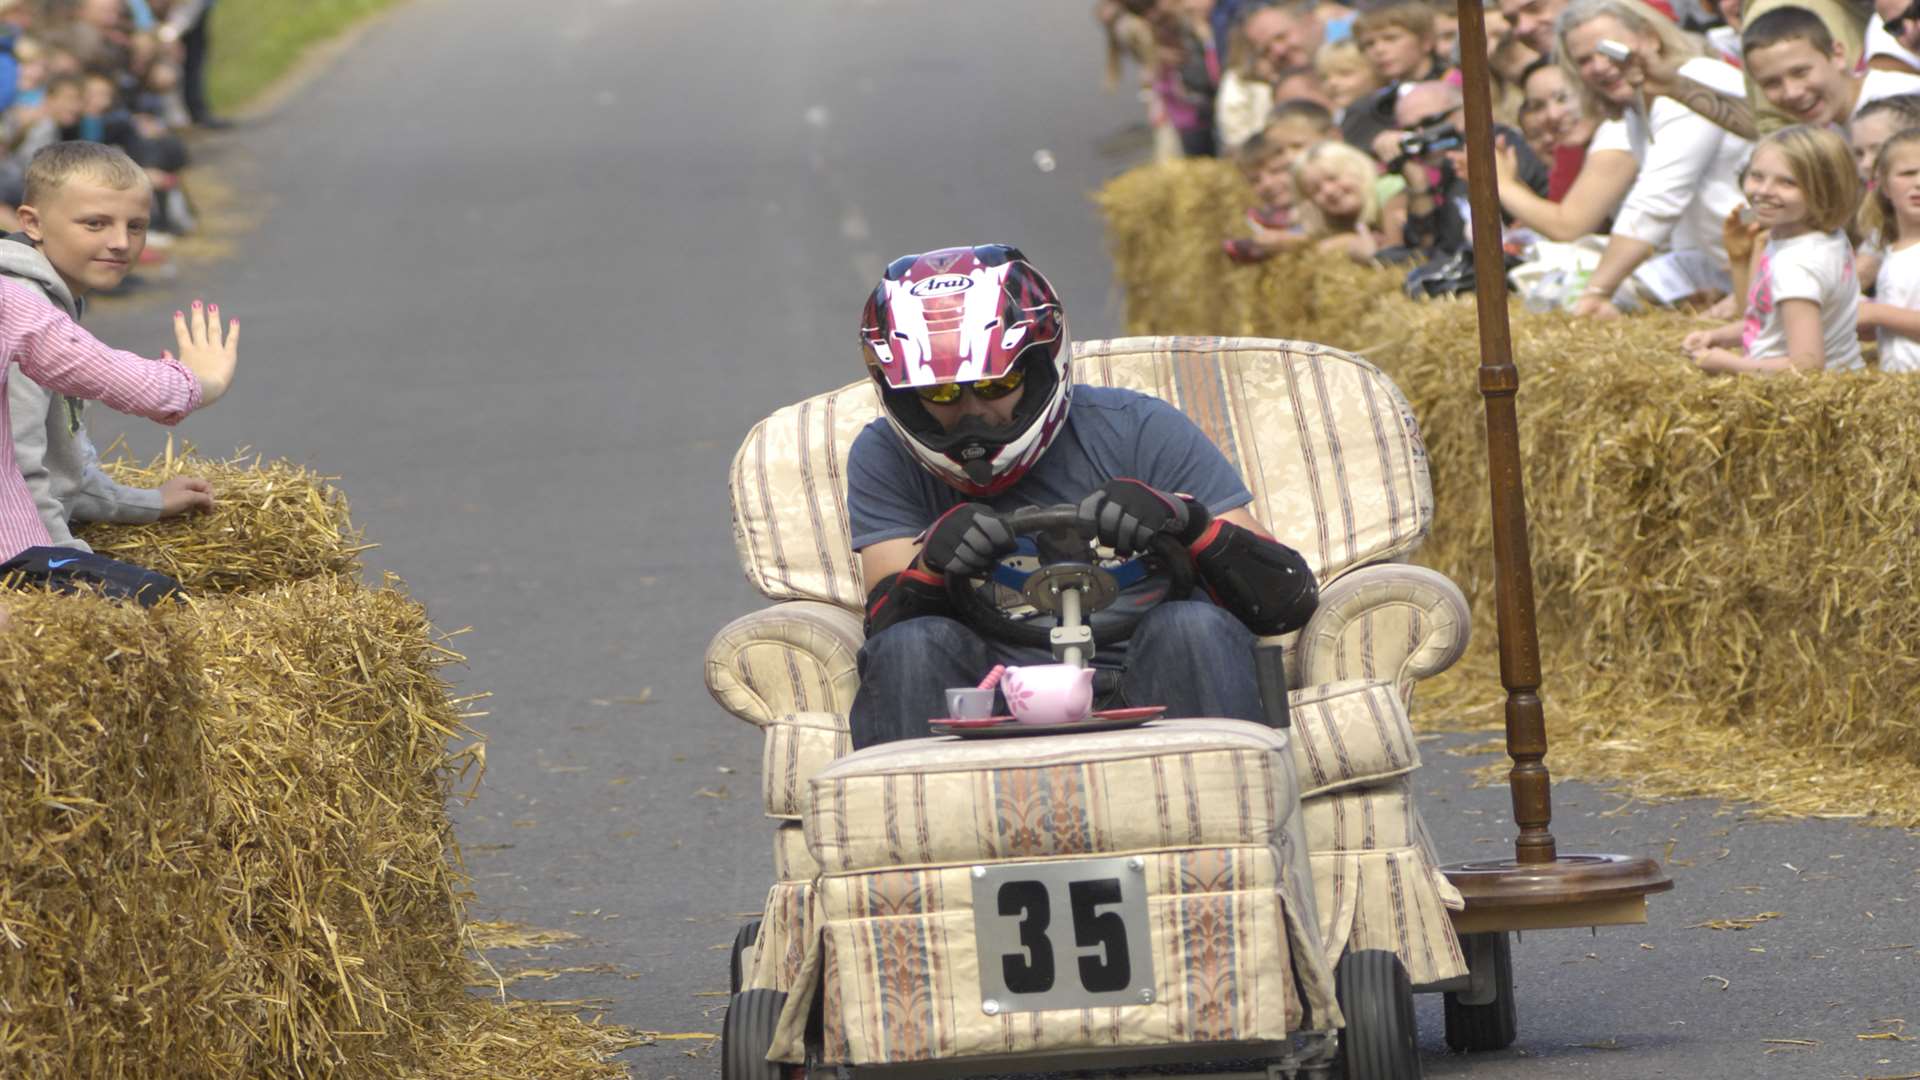 The homemade carts race down Aldington's hills, cheered on by thousands of spectators